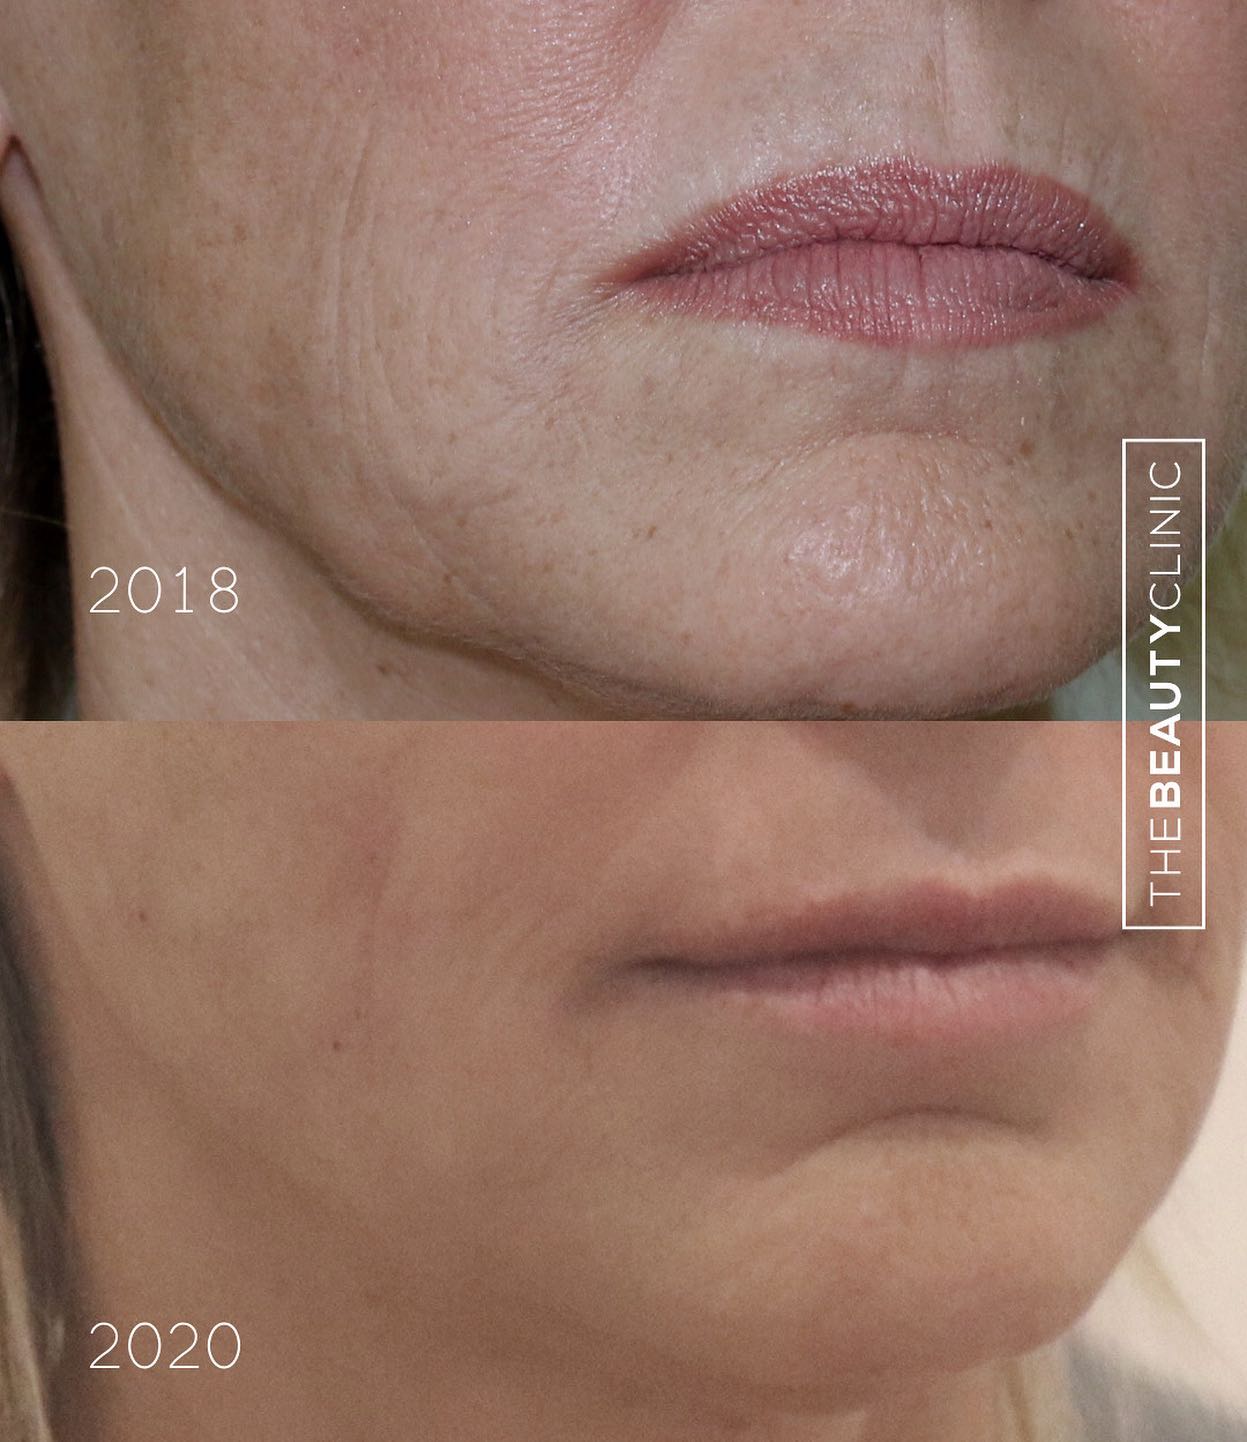 We lose collagen and elastin as we age, and this loss is seen in loose skin, wrinkles, and jowls.